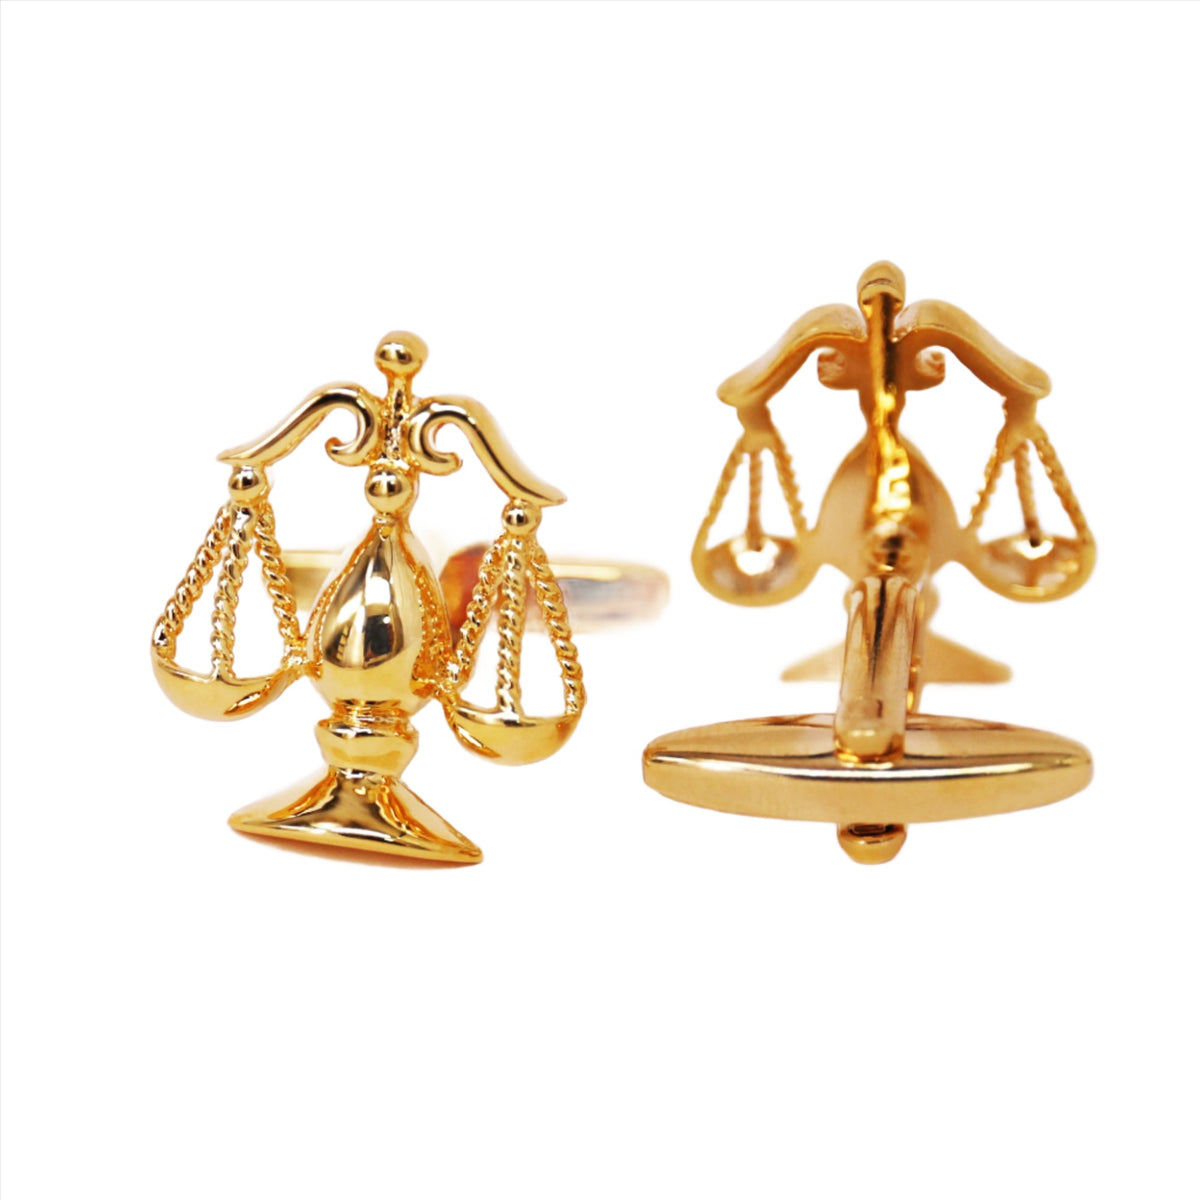 Scales of Justice Cufflinks Lawyer Judge Gold Cuff Links